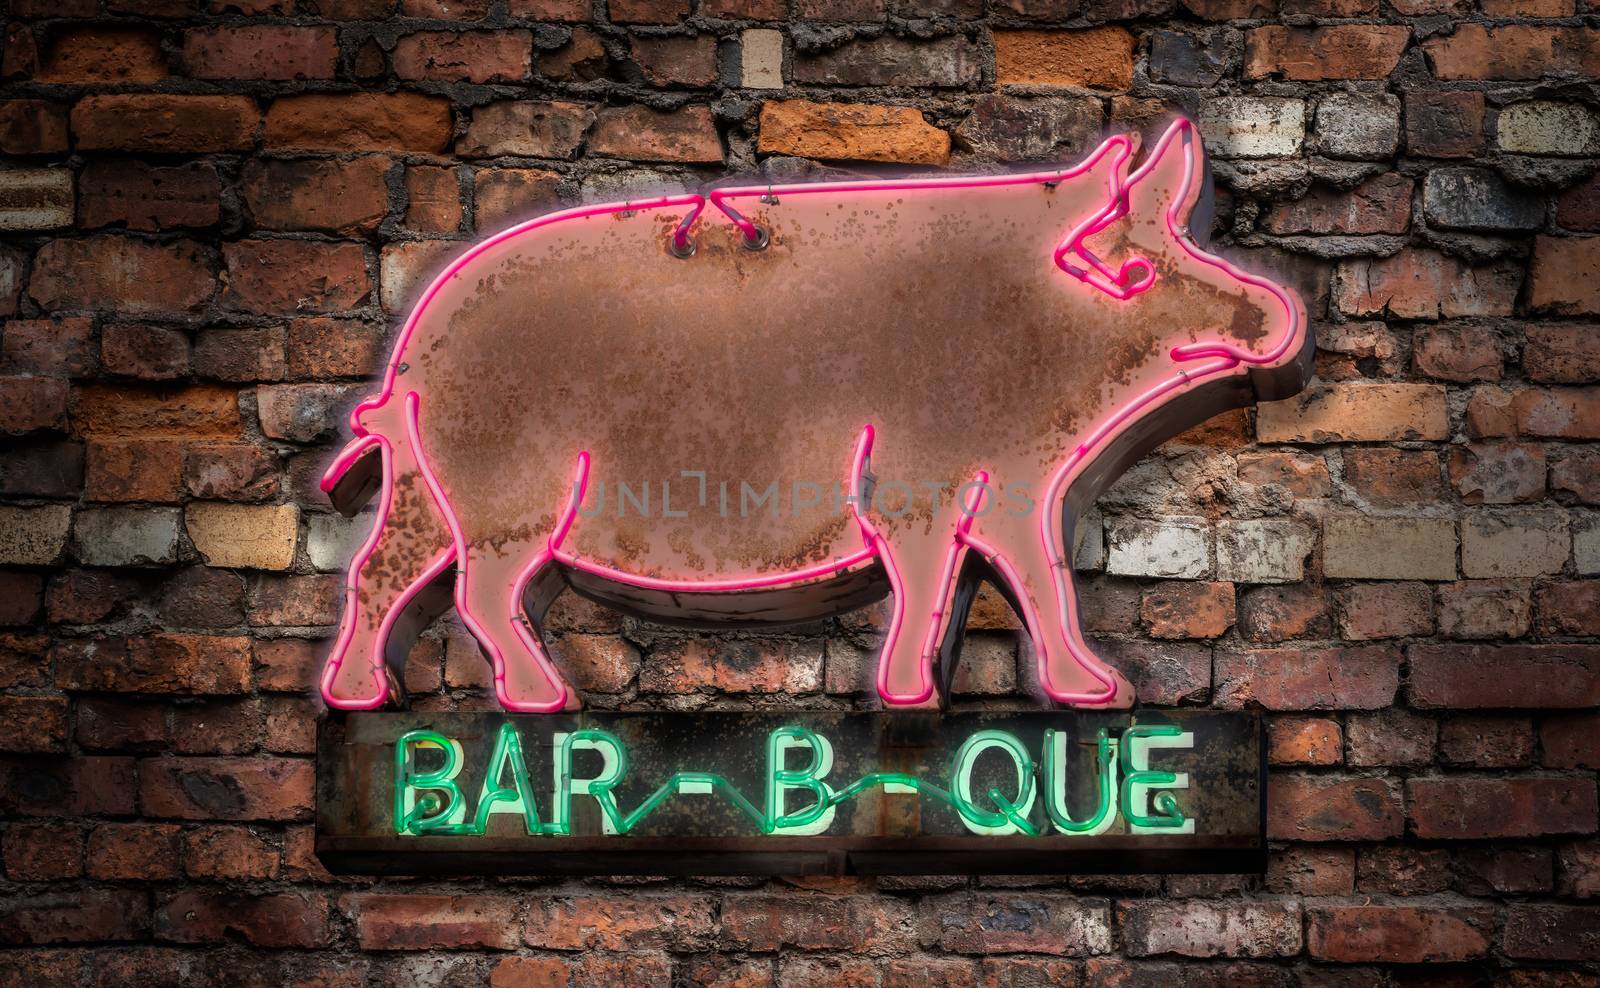 Neon Rustic Old Neon Pig Sign For A Bar-B-Que (Barbecue Or BBQ) Diner